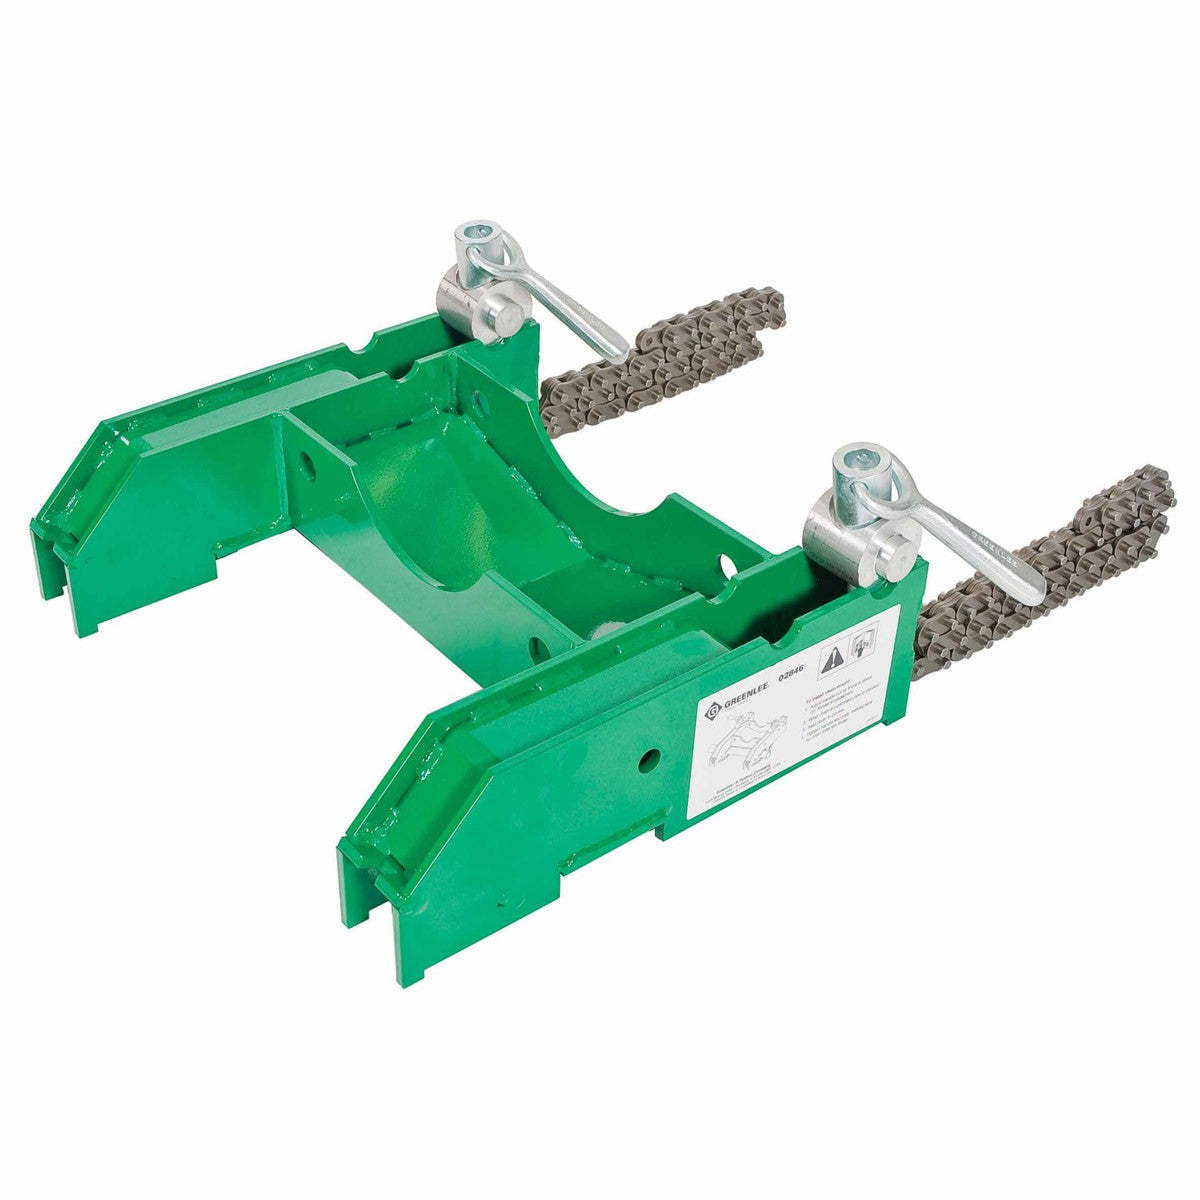 Greenlee 02846 Chain Mount for Ultra Tugger 5 and 8